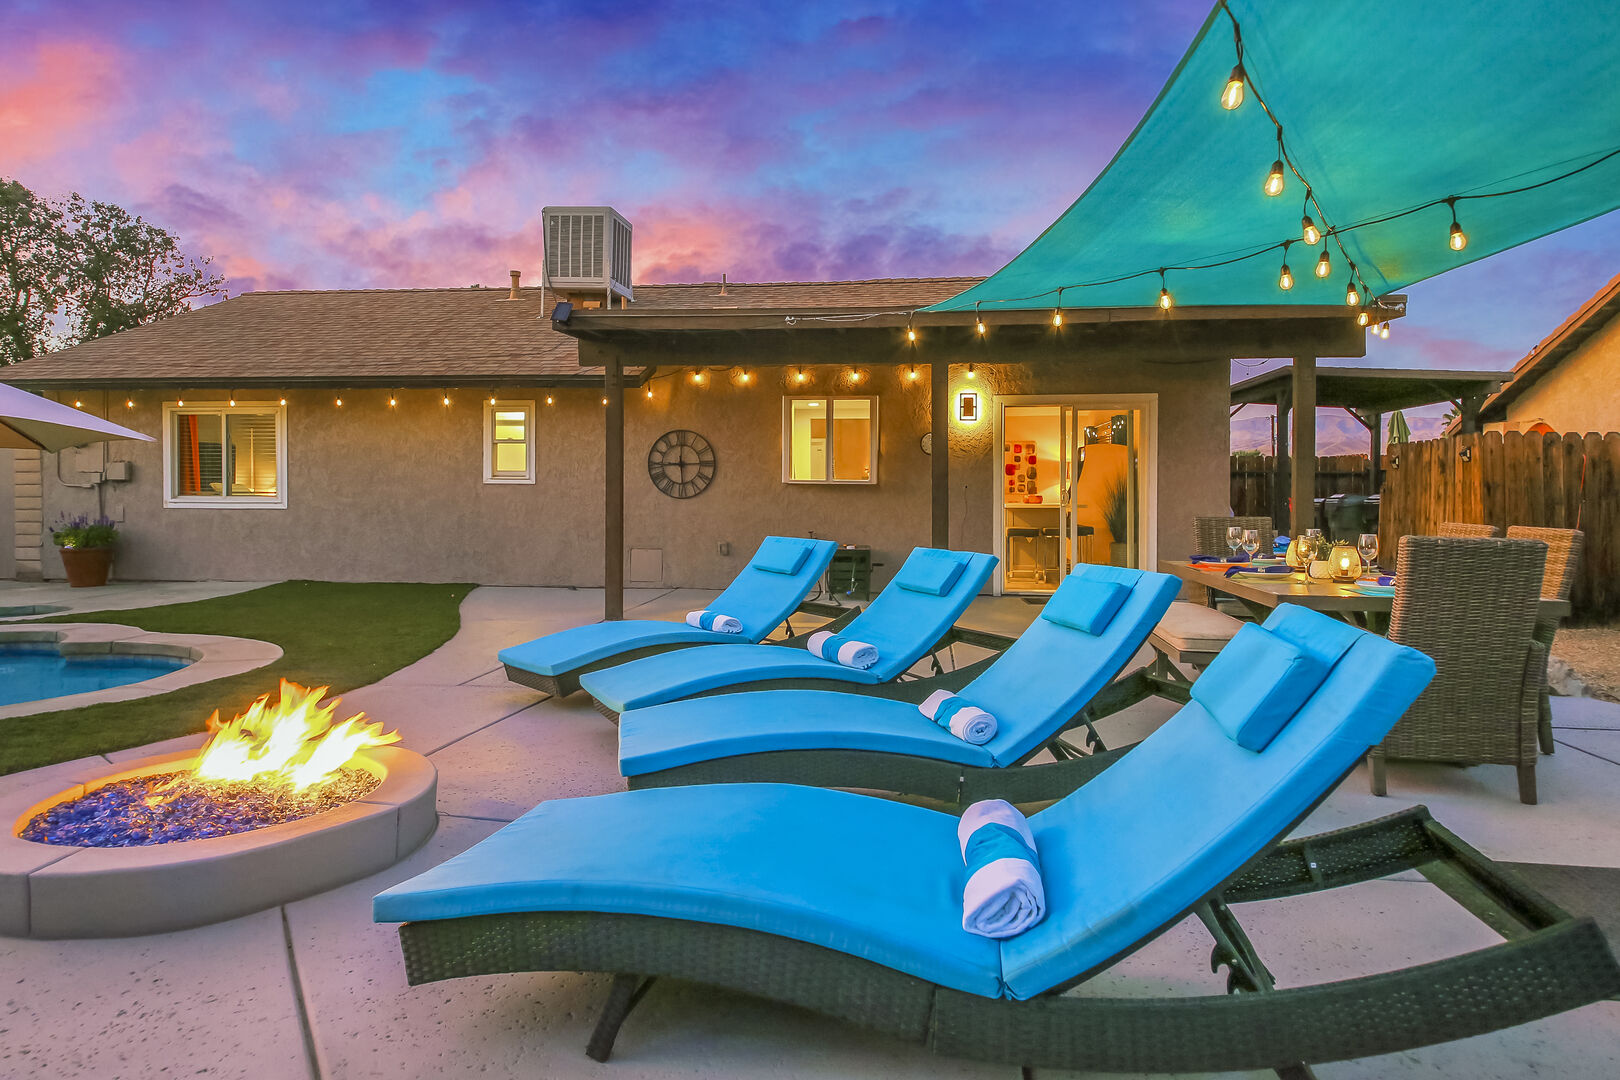 Let the kids enjoy their vacation in the pool while you watch from one of four lounge chairs around the natural gas fire pit.